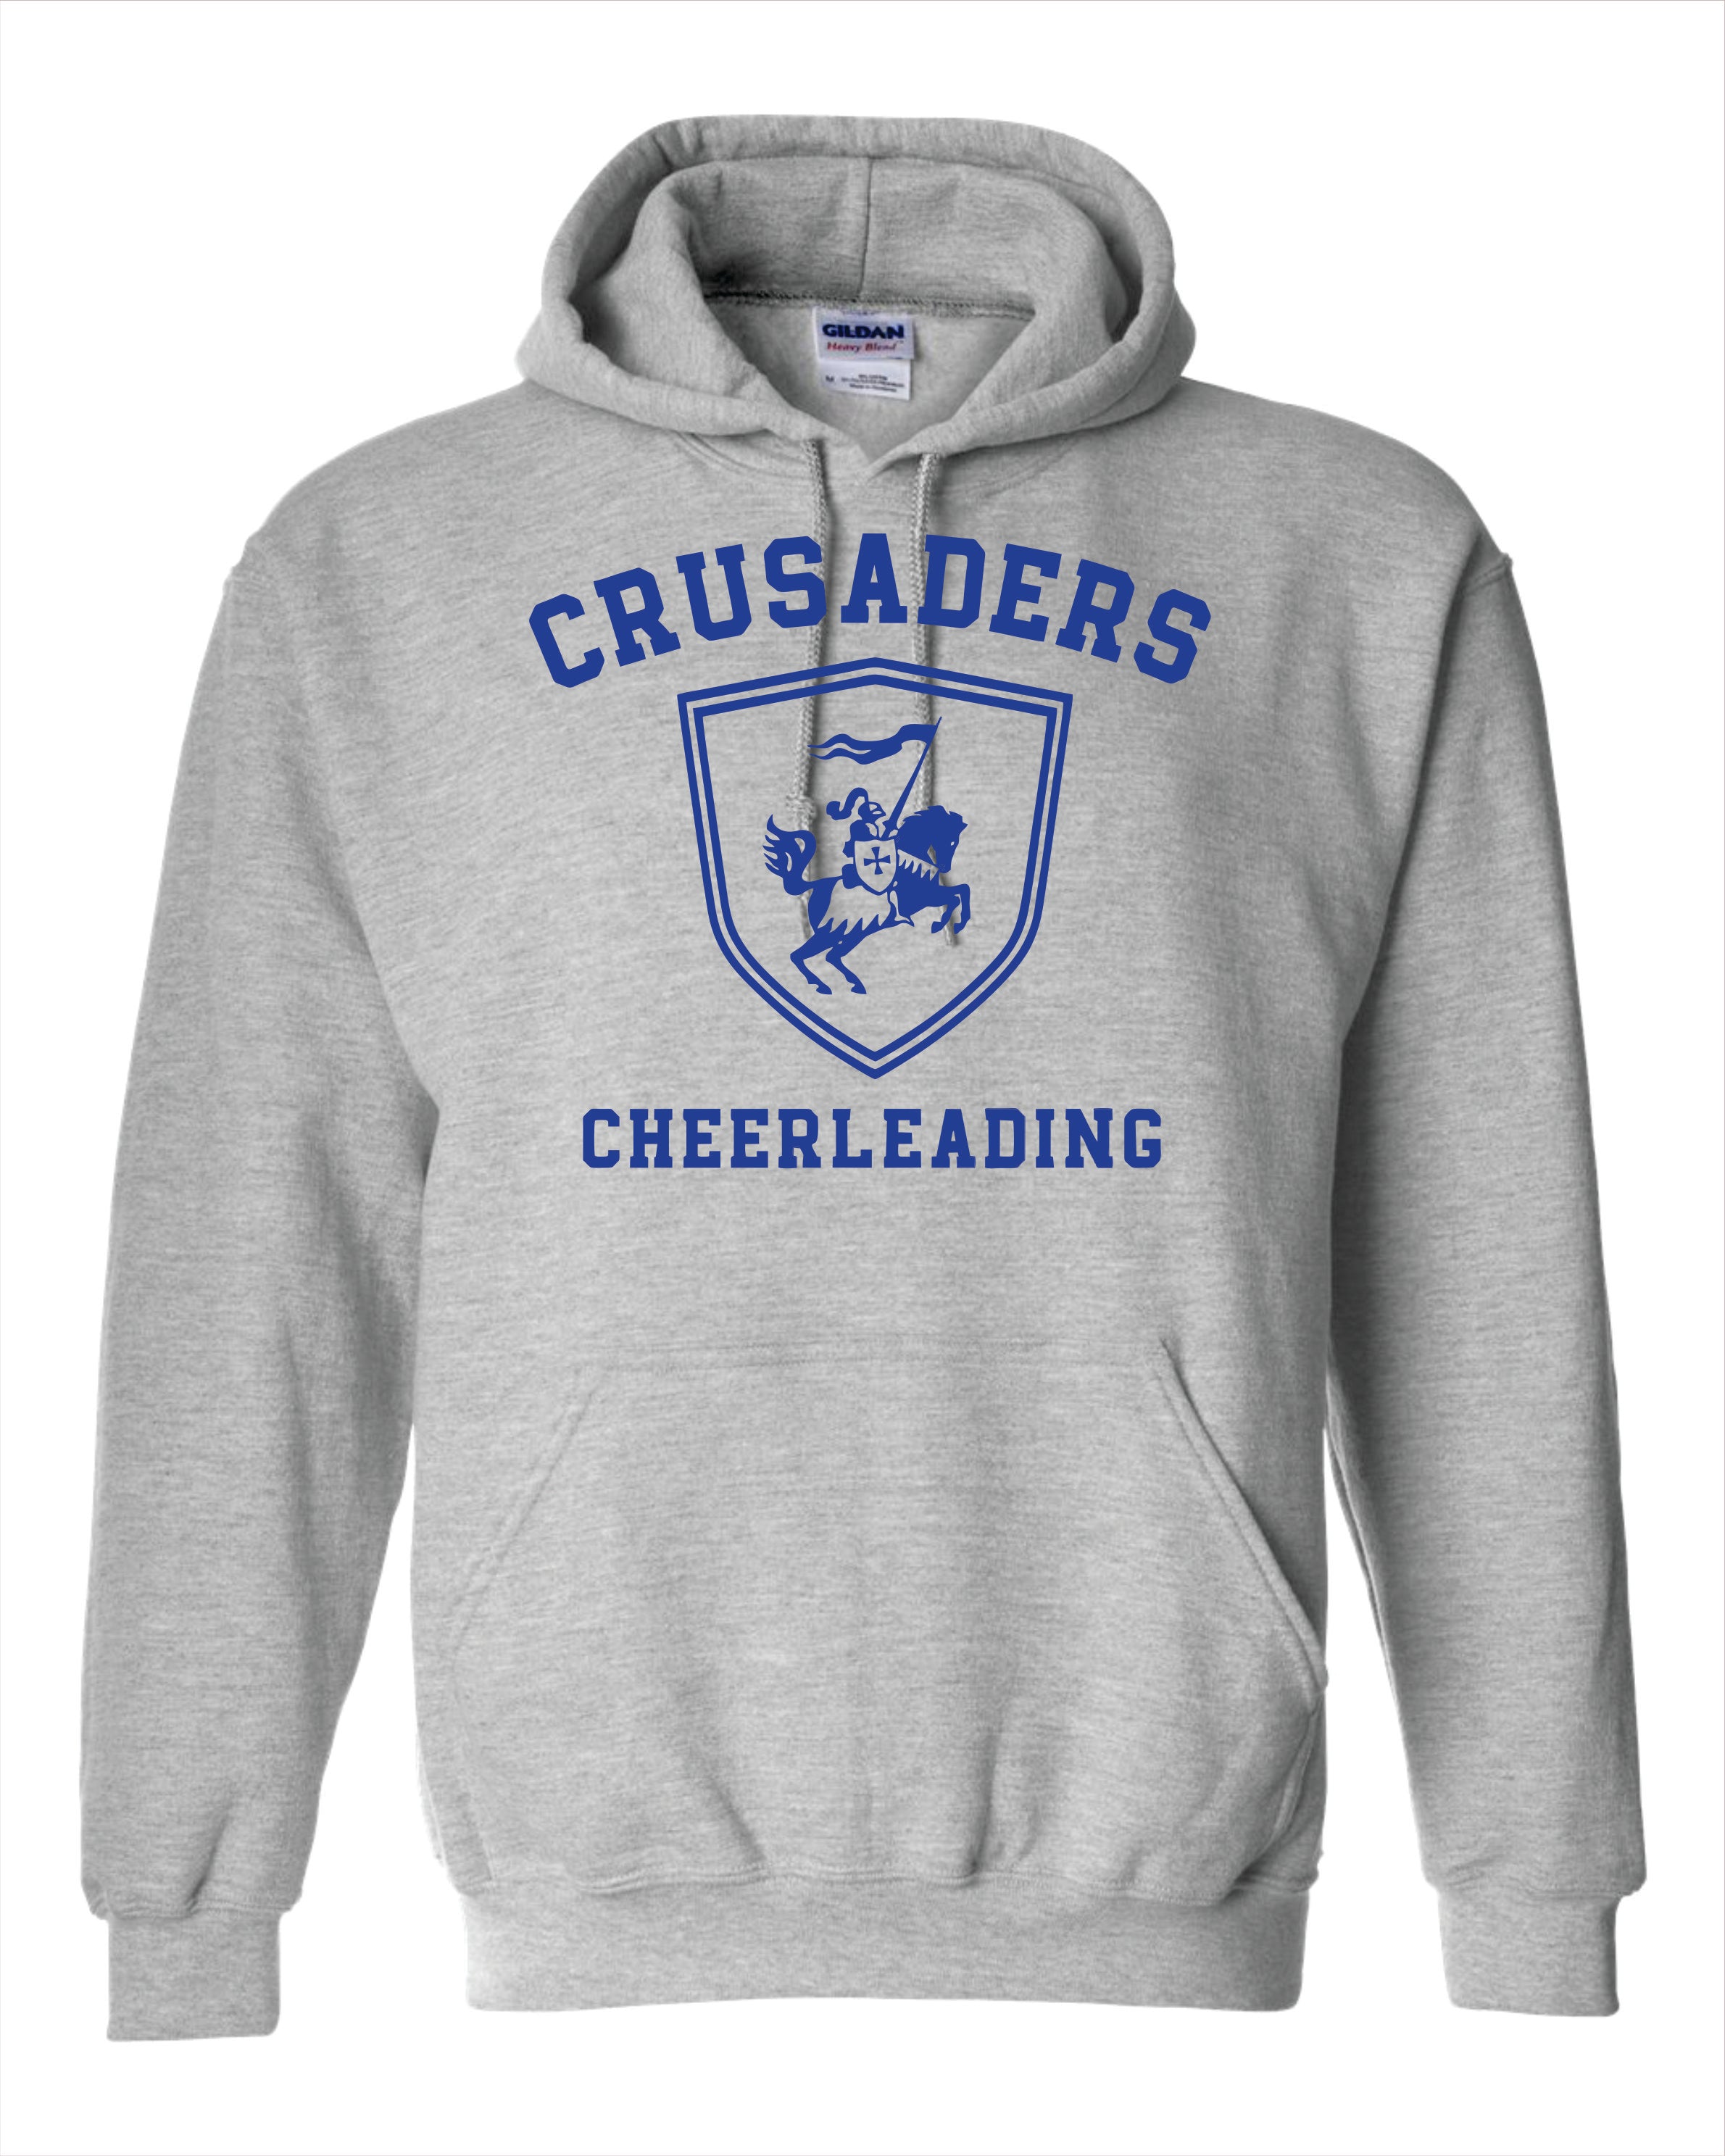 FAW Cheer Hoodie 60/40 Cotton/Poly Blend